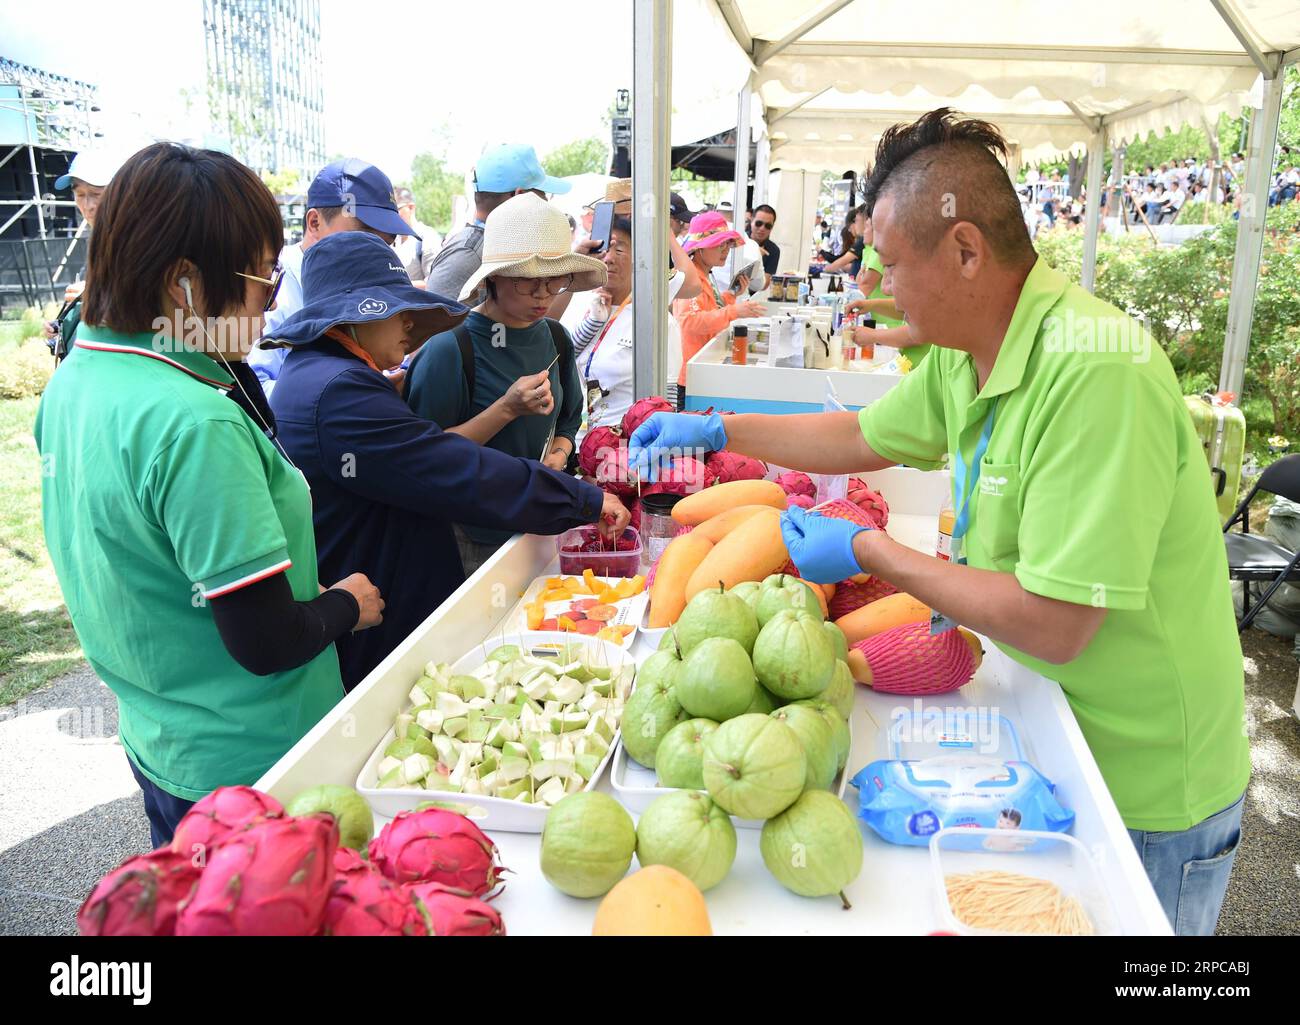 (190629) -- BEIJING, June 29, 2019 -- Tourists taste fruits at the Taiwan Garden during the Taiwan Day event at the Beijing International Horticultural Exhibition in Yanqing District of Beijing, capital of China, June 29, 2019. The ongoing Beijing International Horticultural Exhibition ushered in Taiwan Day event on Saturday. ) CHINA-BEIJING-HORTICULTURAL EXPO-TAIWAN (CN) RenxChao PUBLICATIONxNOTxINxCHN Stock Photo